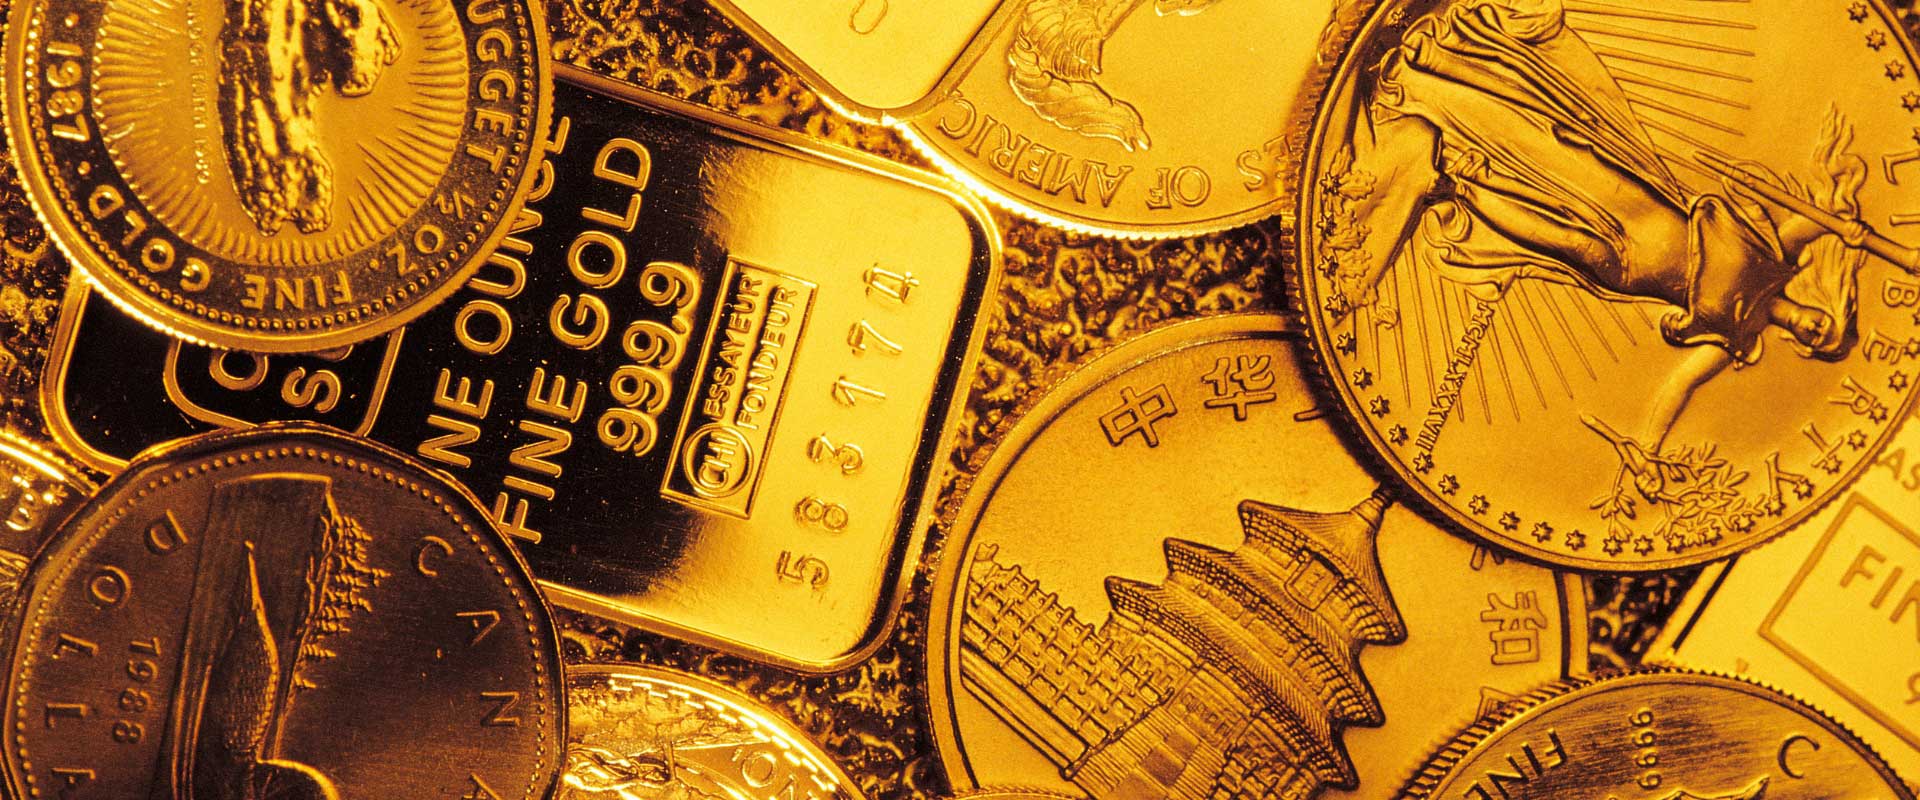 fine gold bars and gold coins